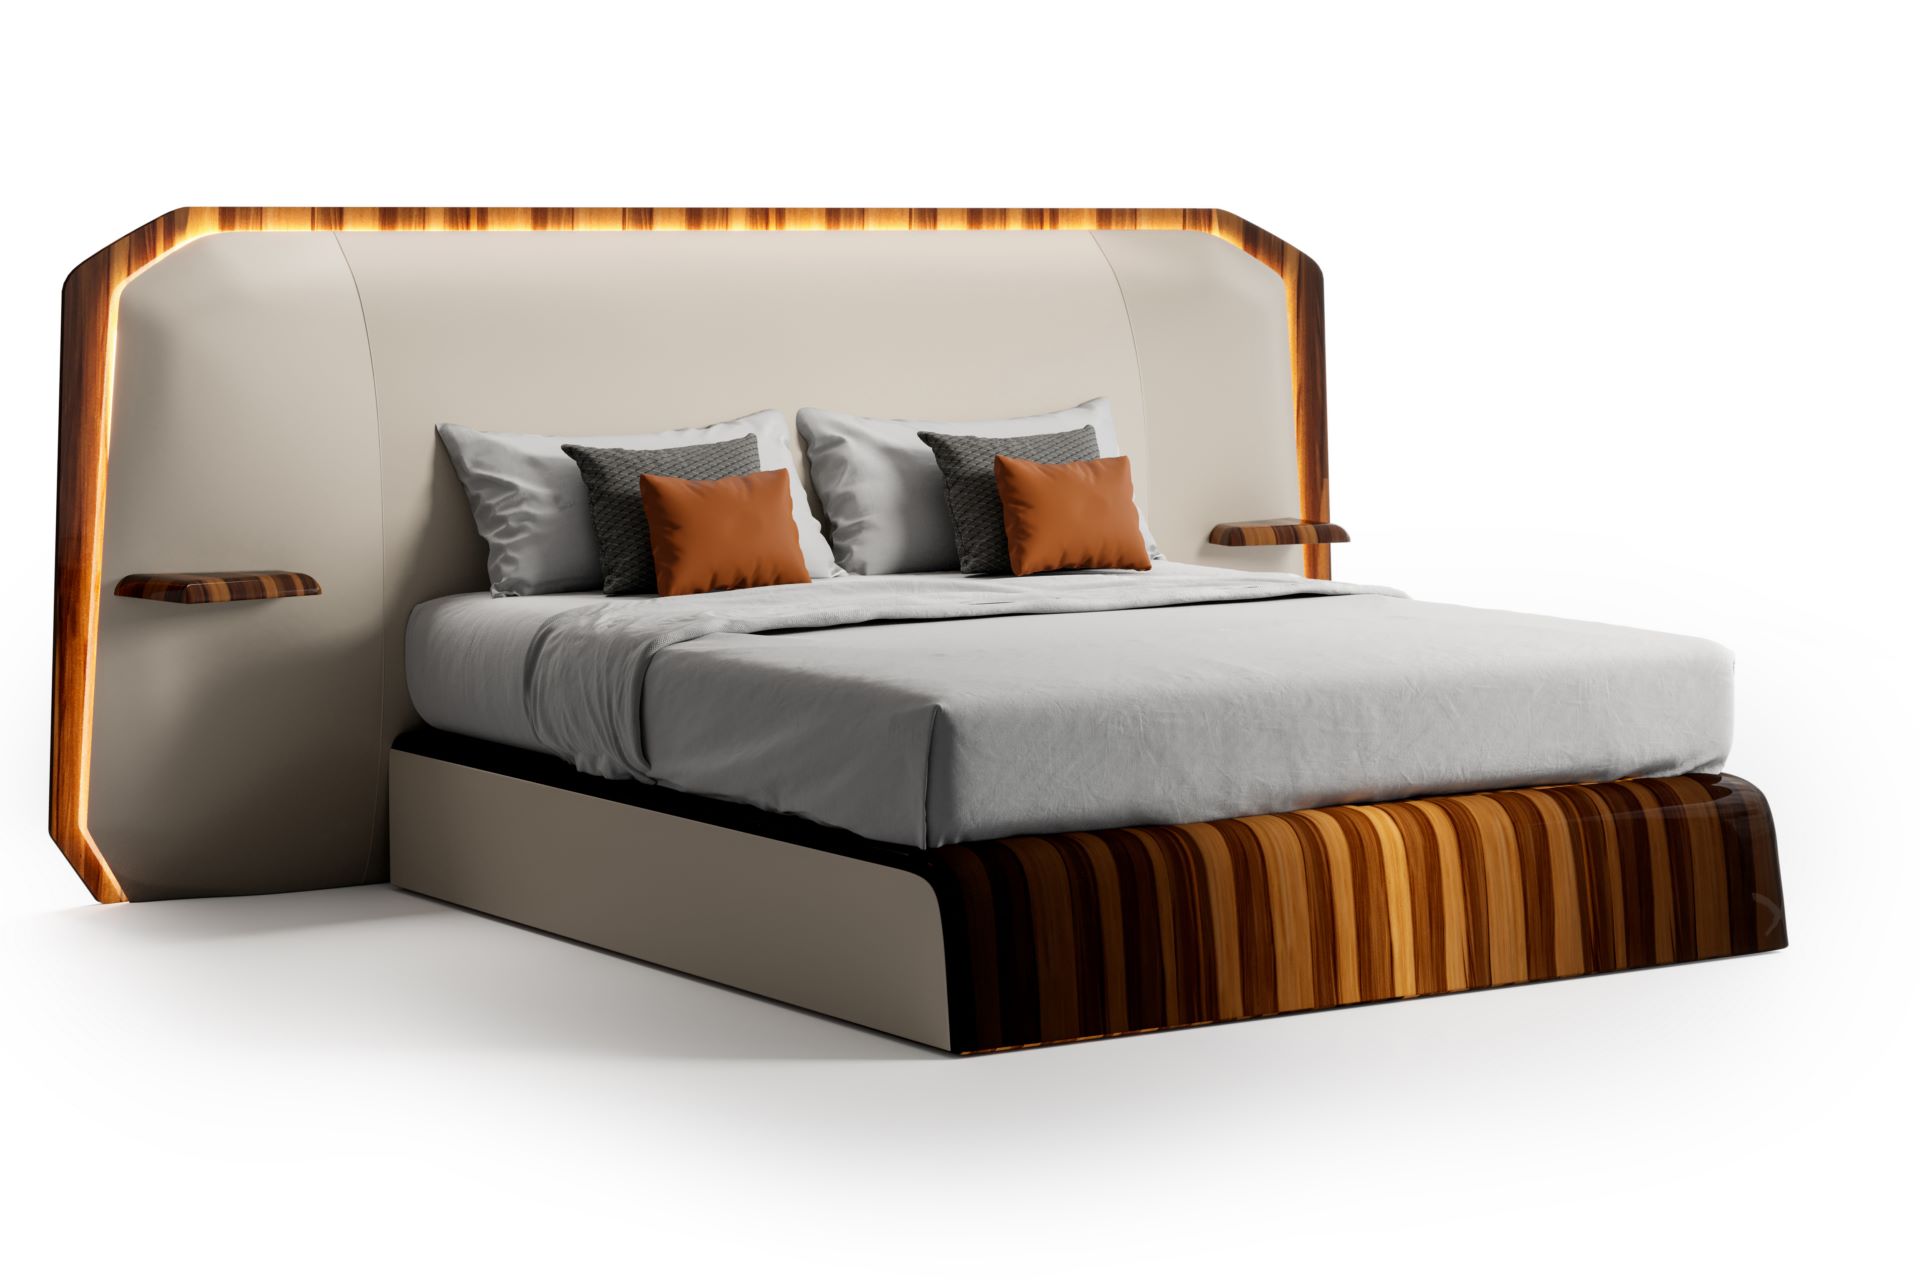 Bentley-Home-Collection-Brixton-bed-6